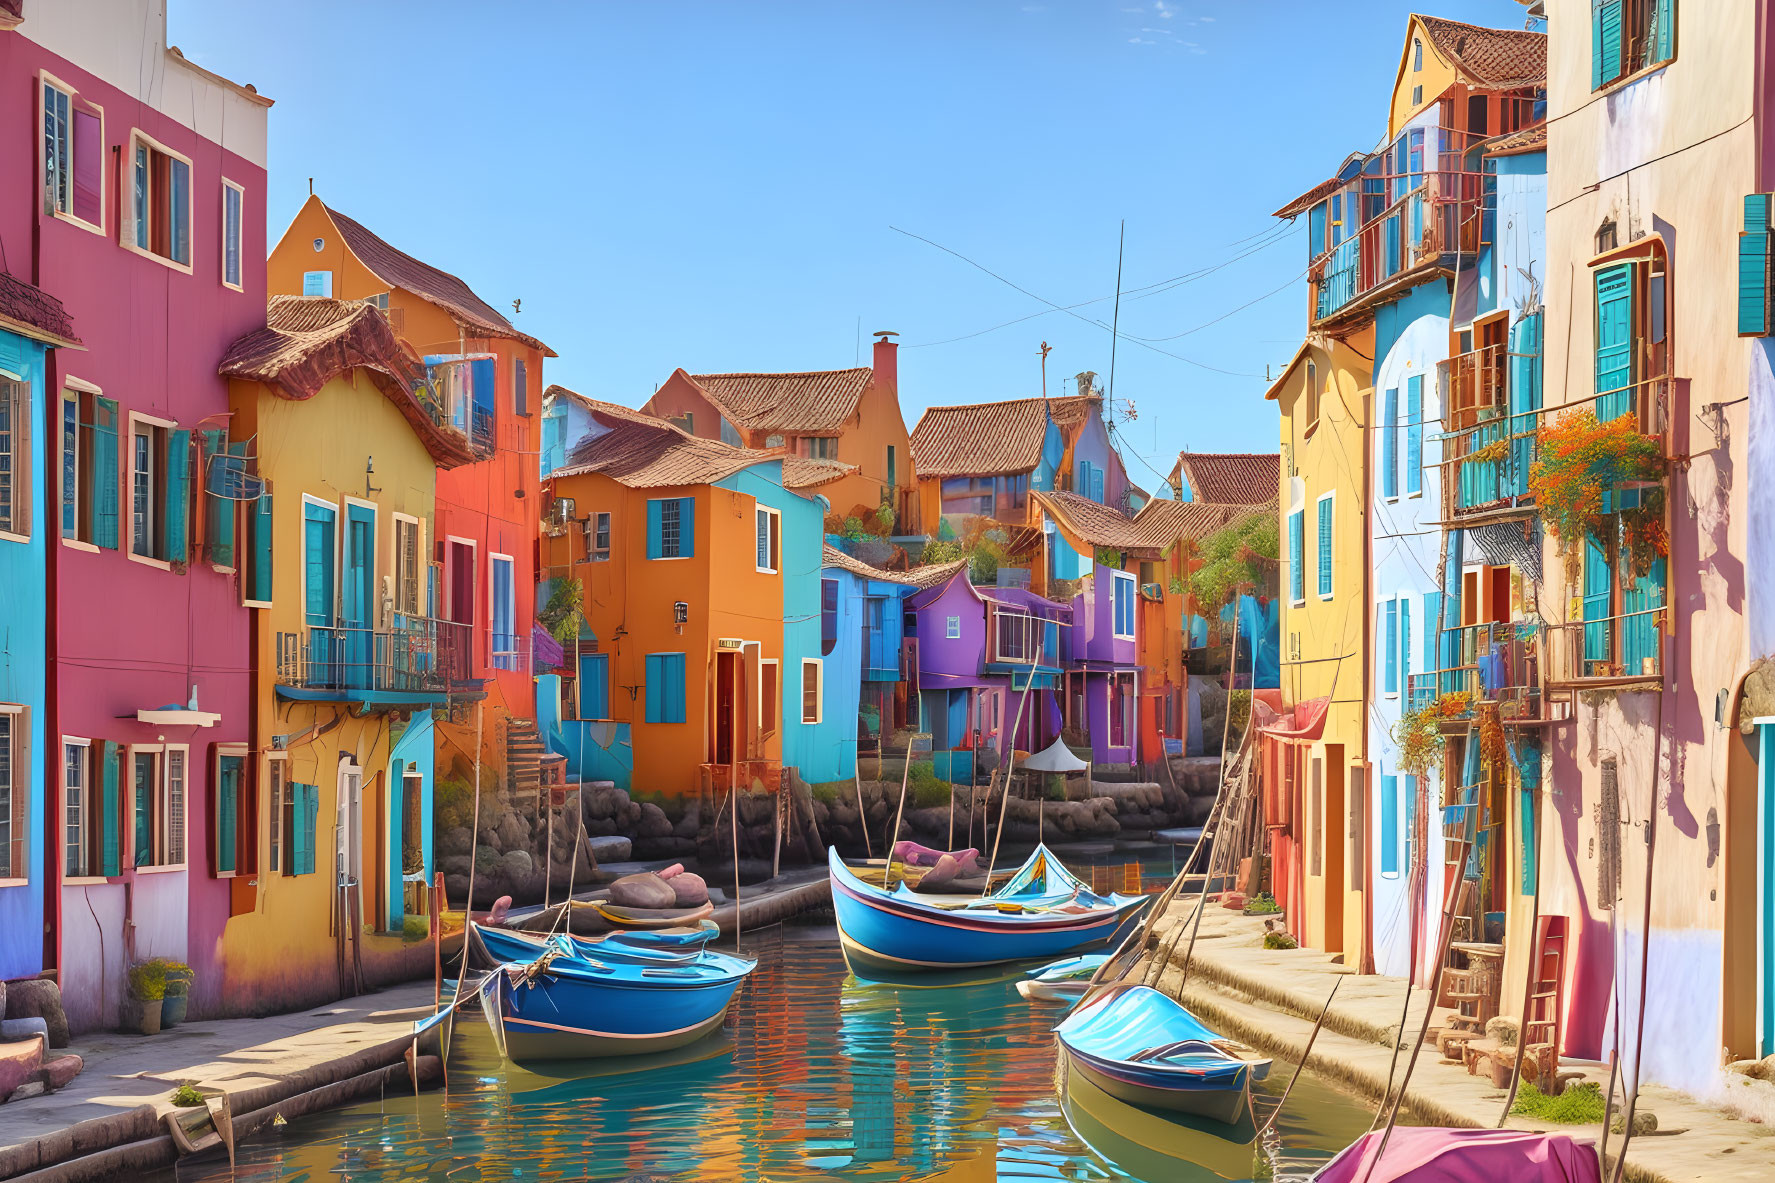 Vibrant canal scene with colorful houses and moored boats